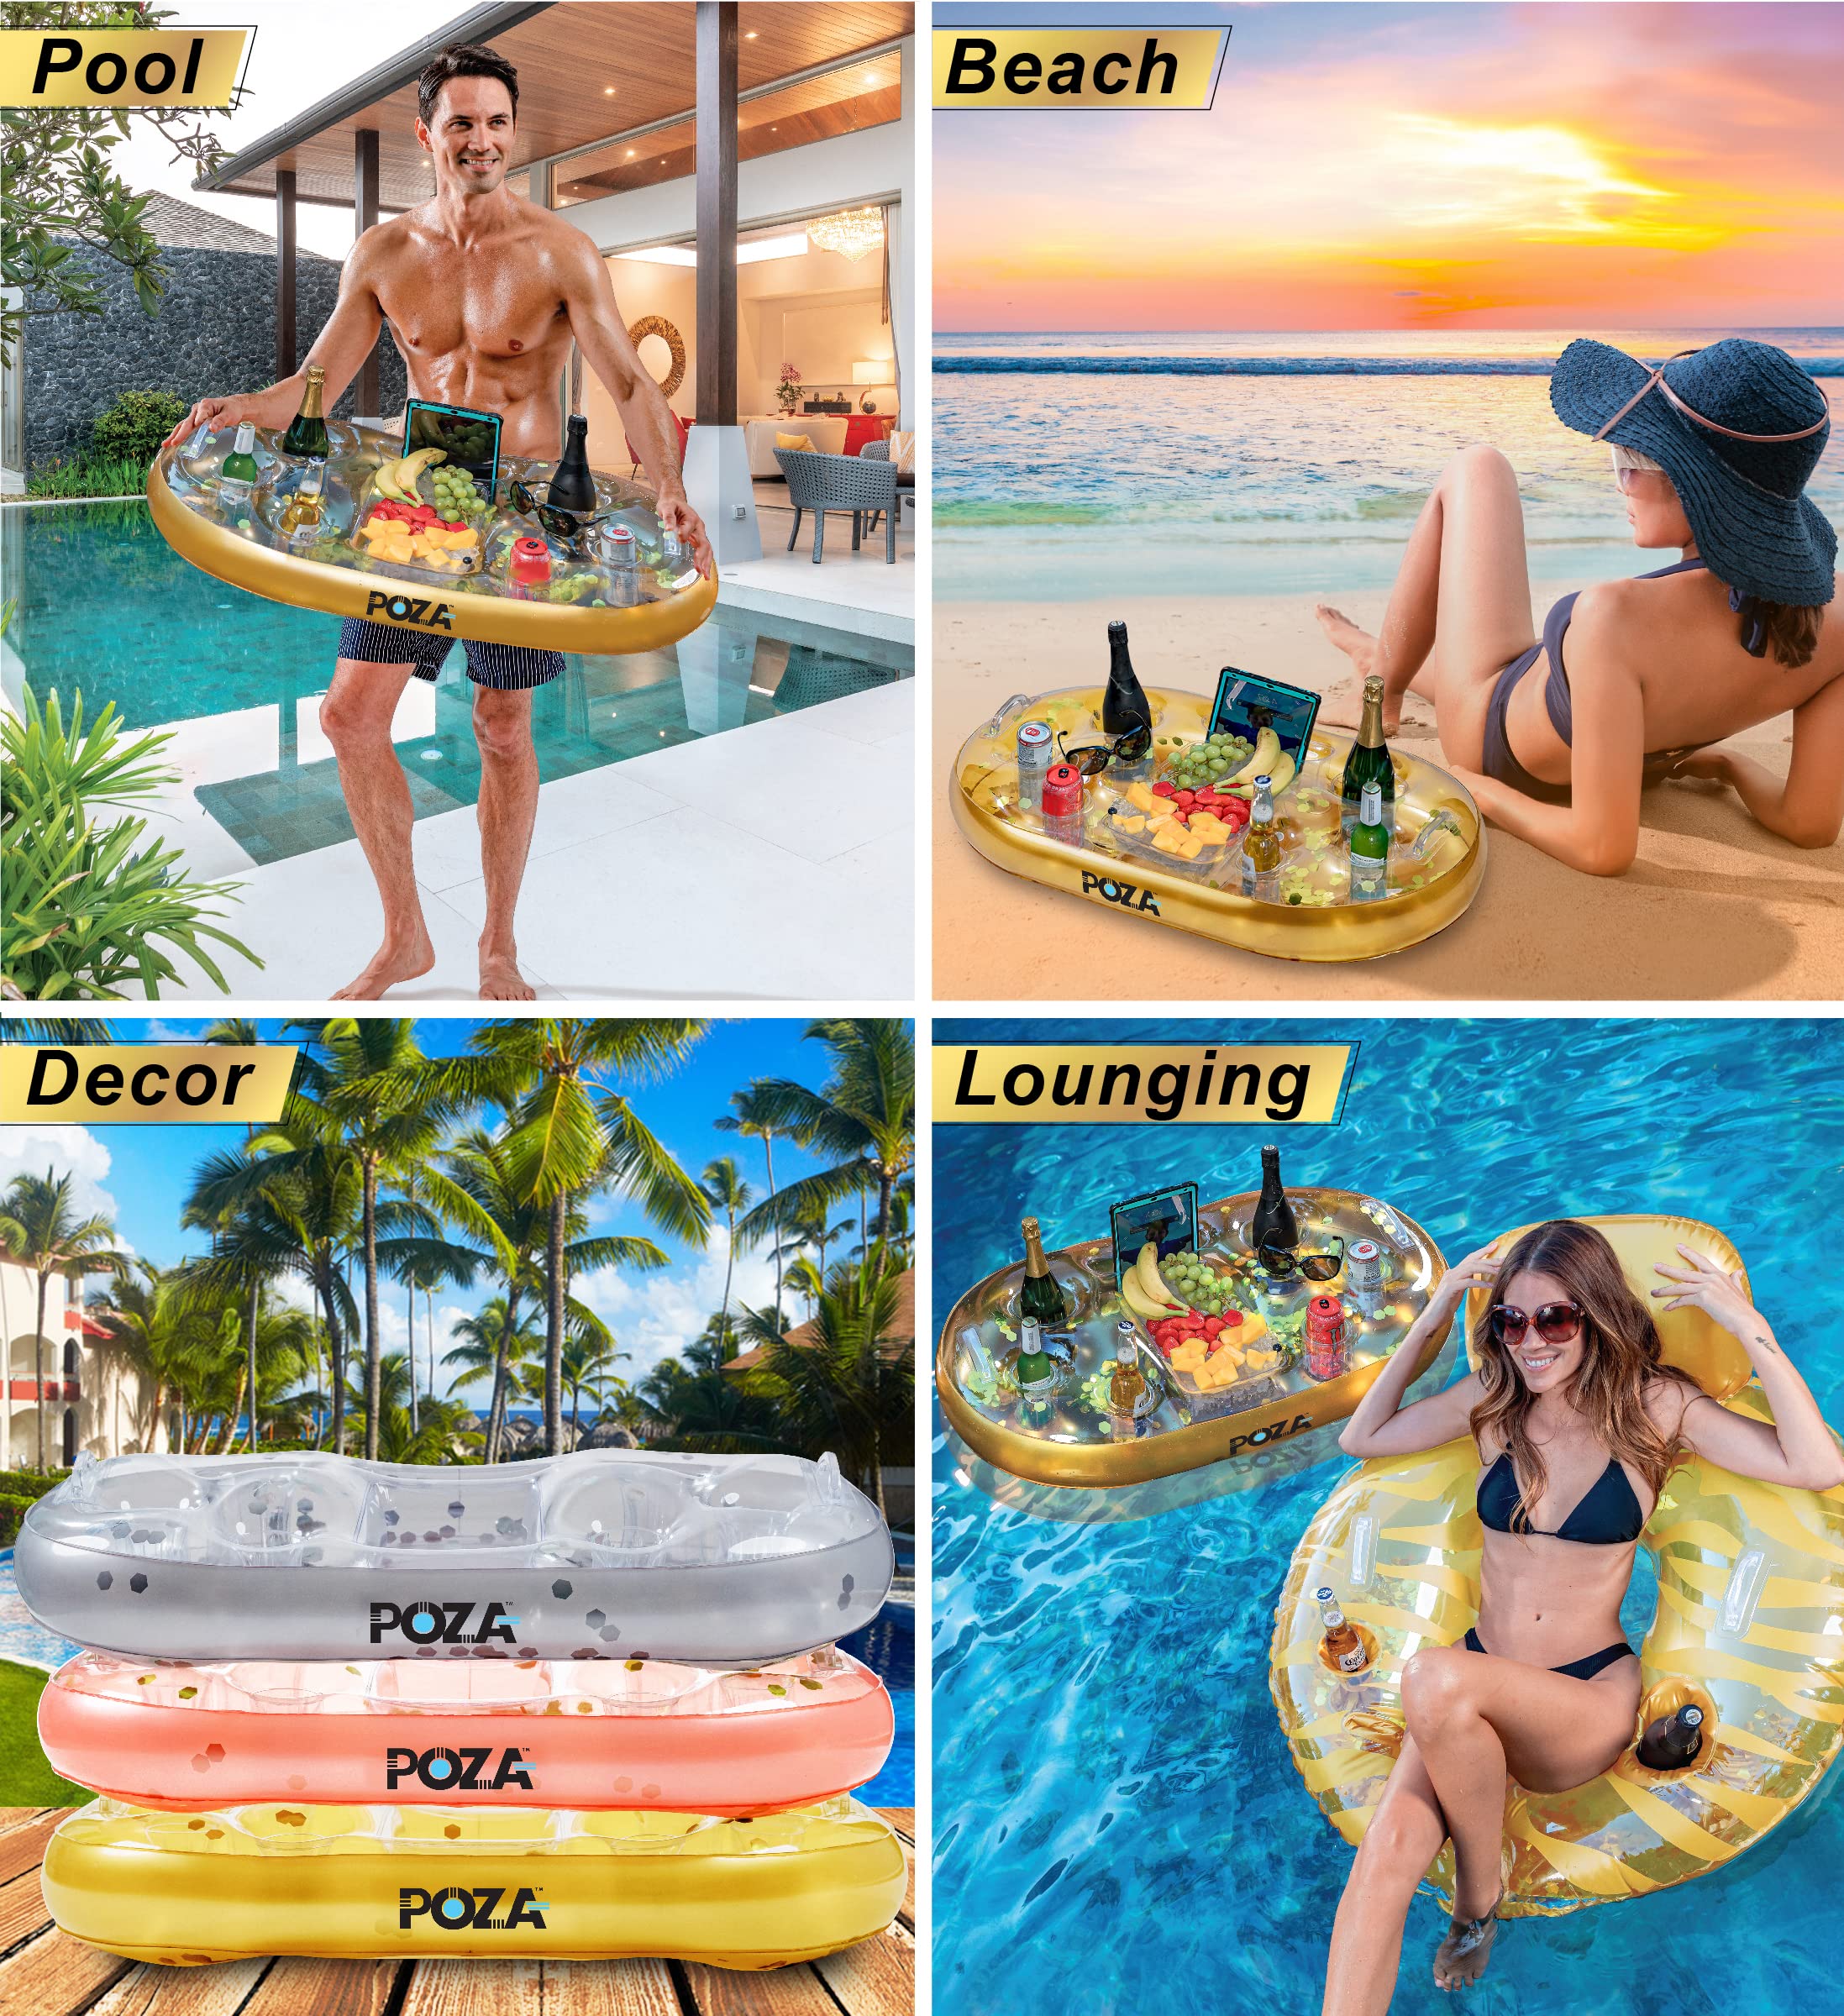 POZA Inflatable Gold Floating Cooler - Luxurious Drink Holder Filled with Sparkly Confetti, Premium Party Float with 8 Holders, Serving Bar for Beach, Lake, Hot Tub, Jacuzzi and Pool - 39x23 Inches